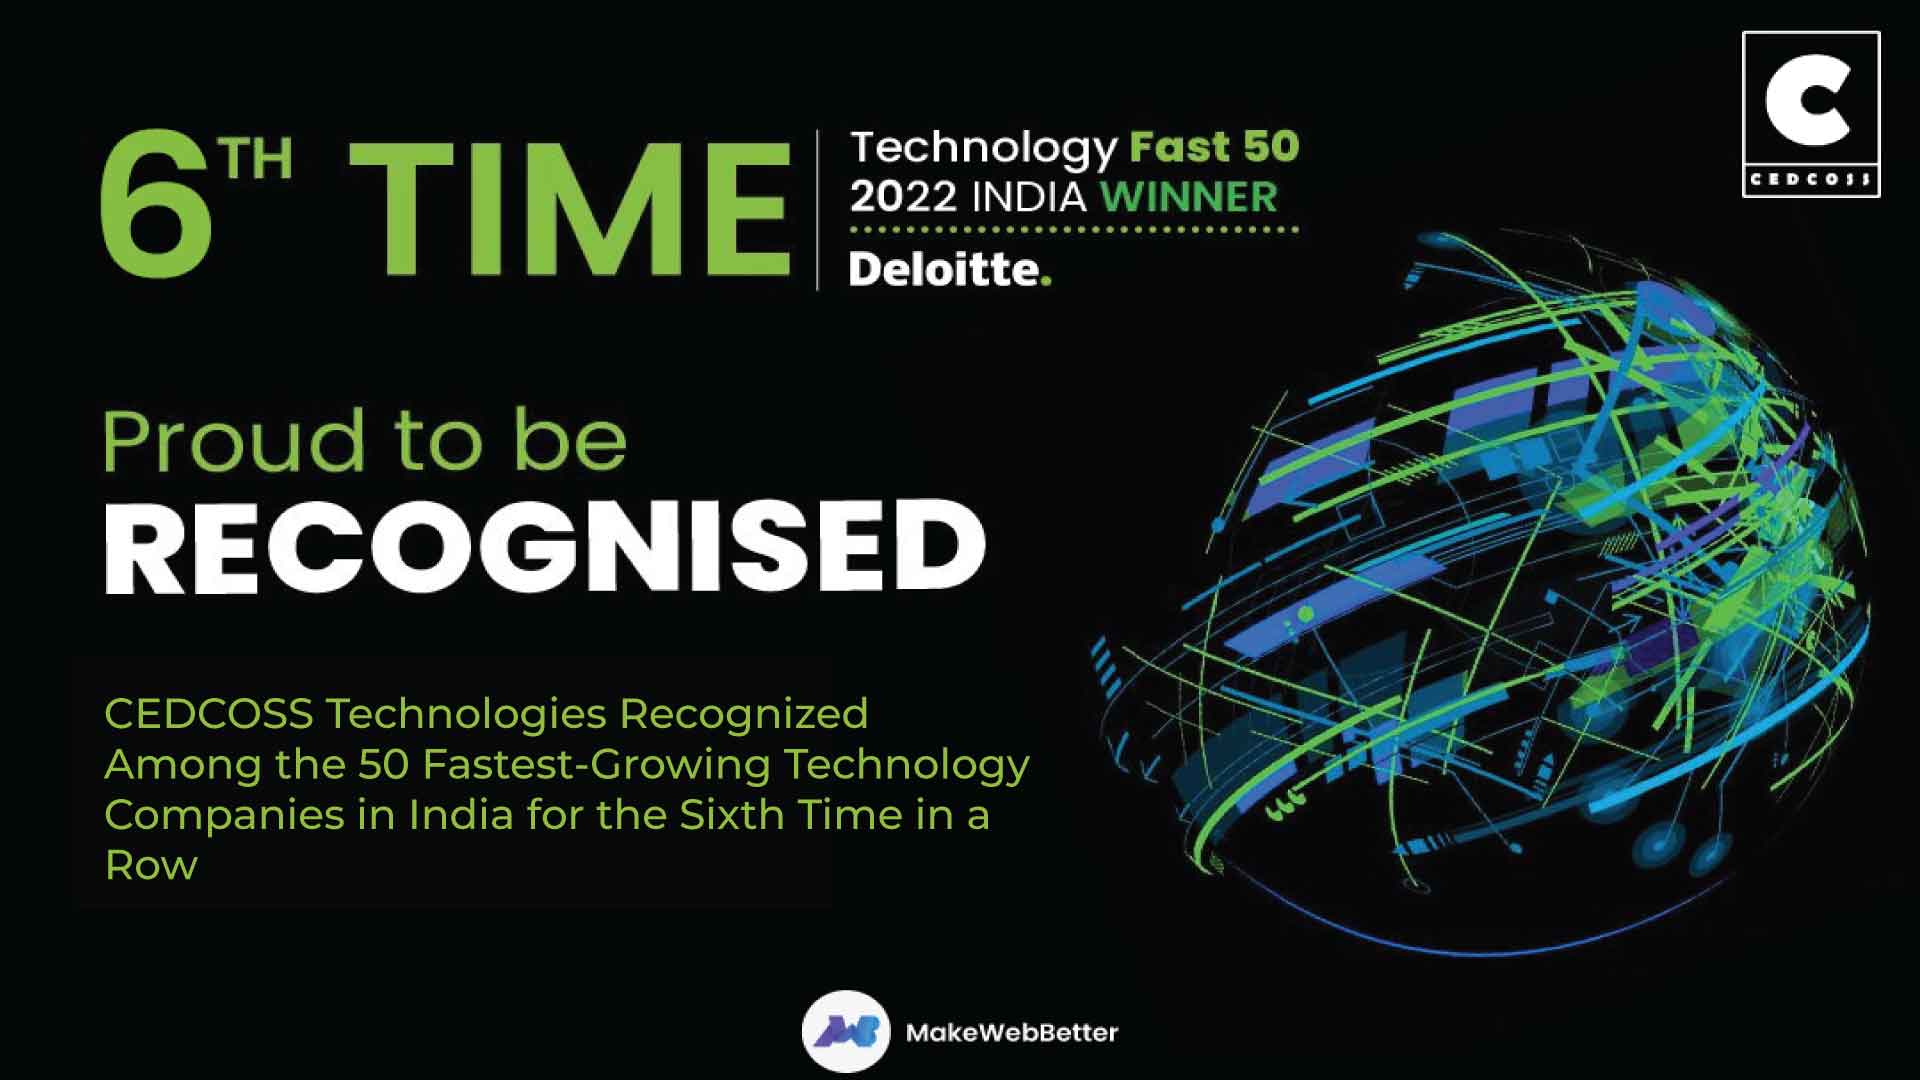 CEDCOSS Awarded as Fastest Growing Technology Company in Deloitte Technology Fast 50 India 2022